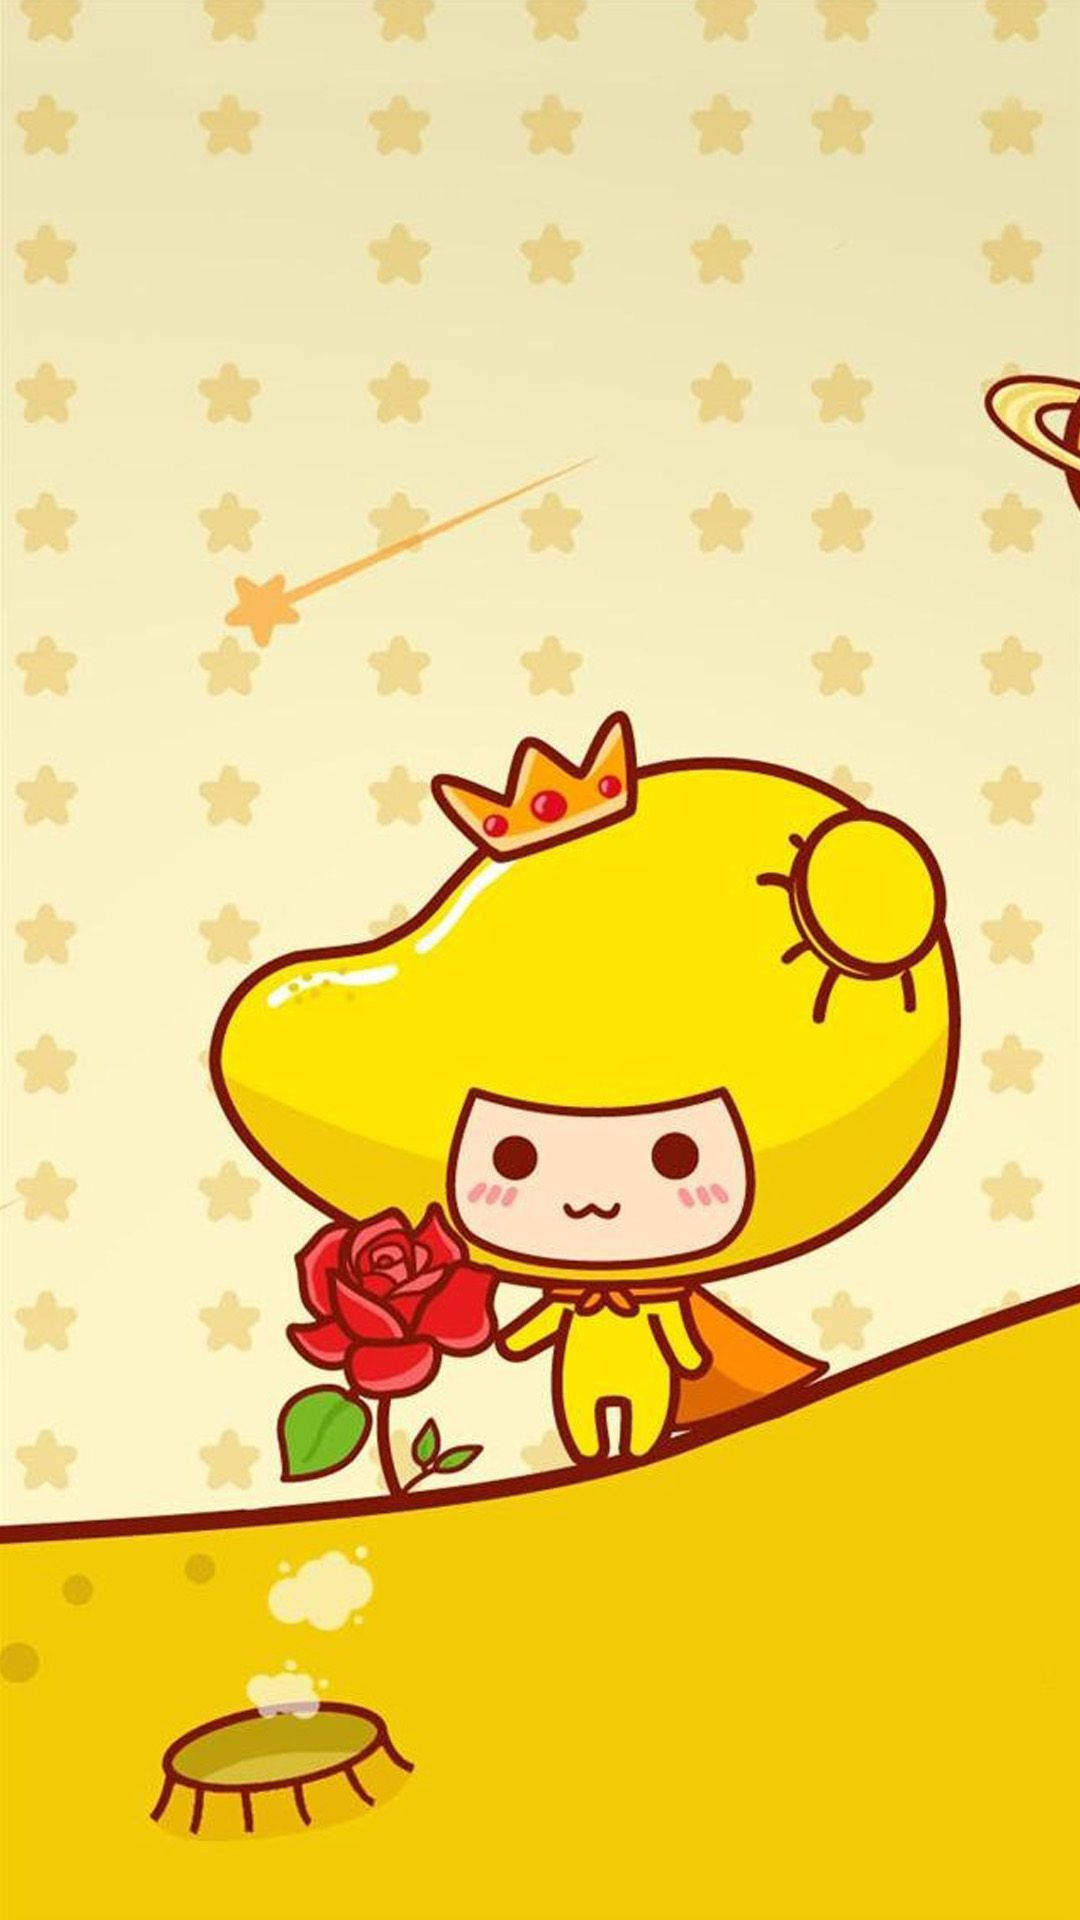 Cute Yellow Character Near Red Rose